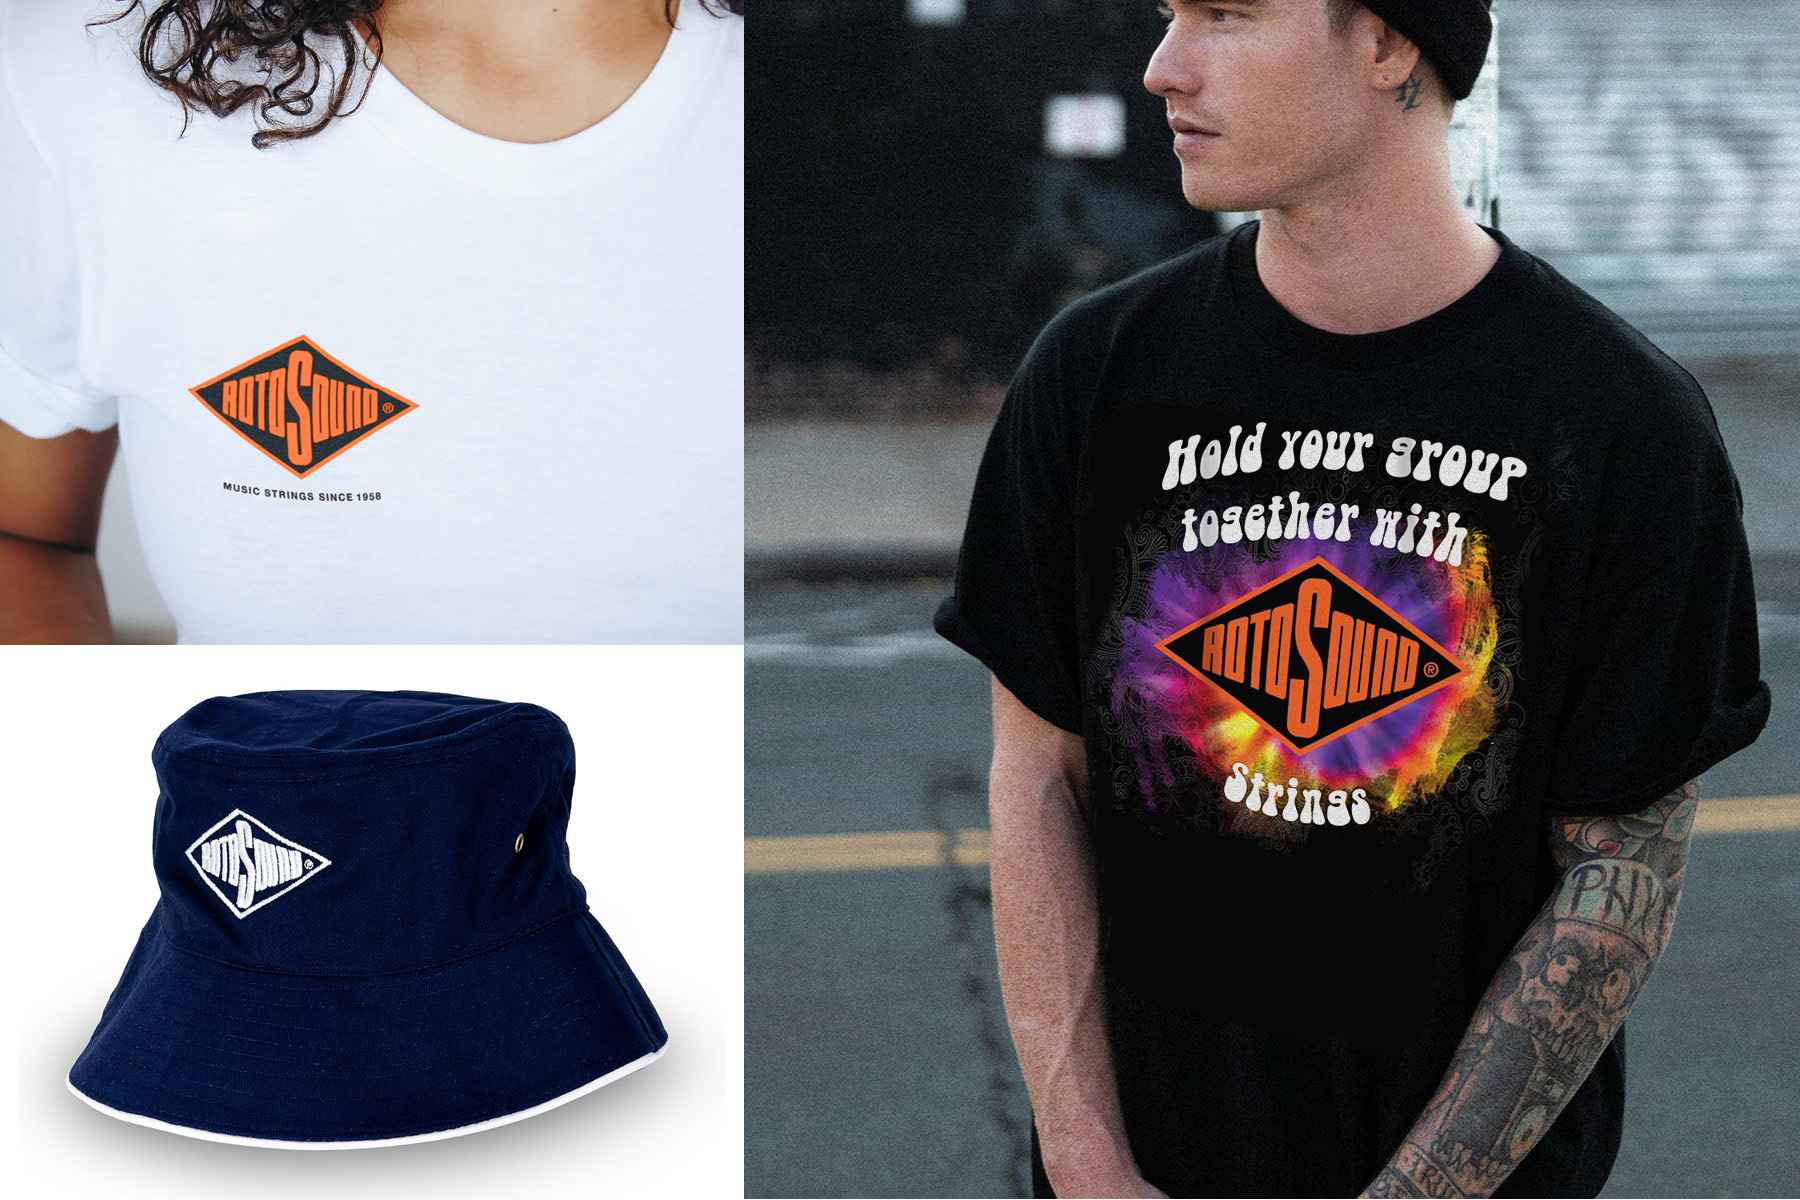 Rotosound launch merchandise web-store with new clothing and lifestyle collections